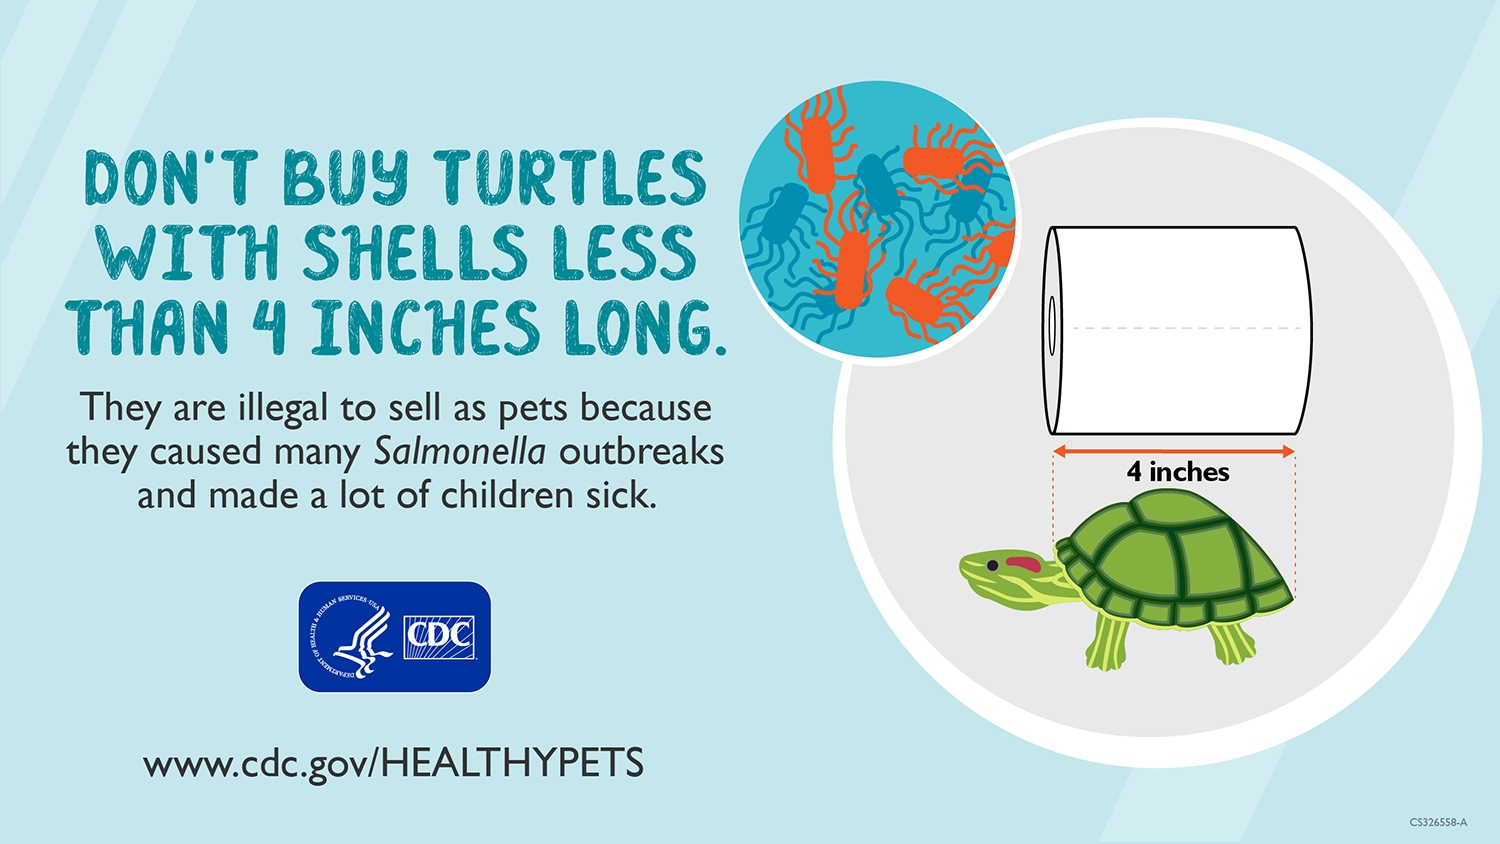 Graphic showing to not buy turtles with shells less than 4 inches long with a turtle compared to a roll of toilet paper.